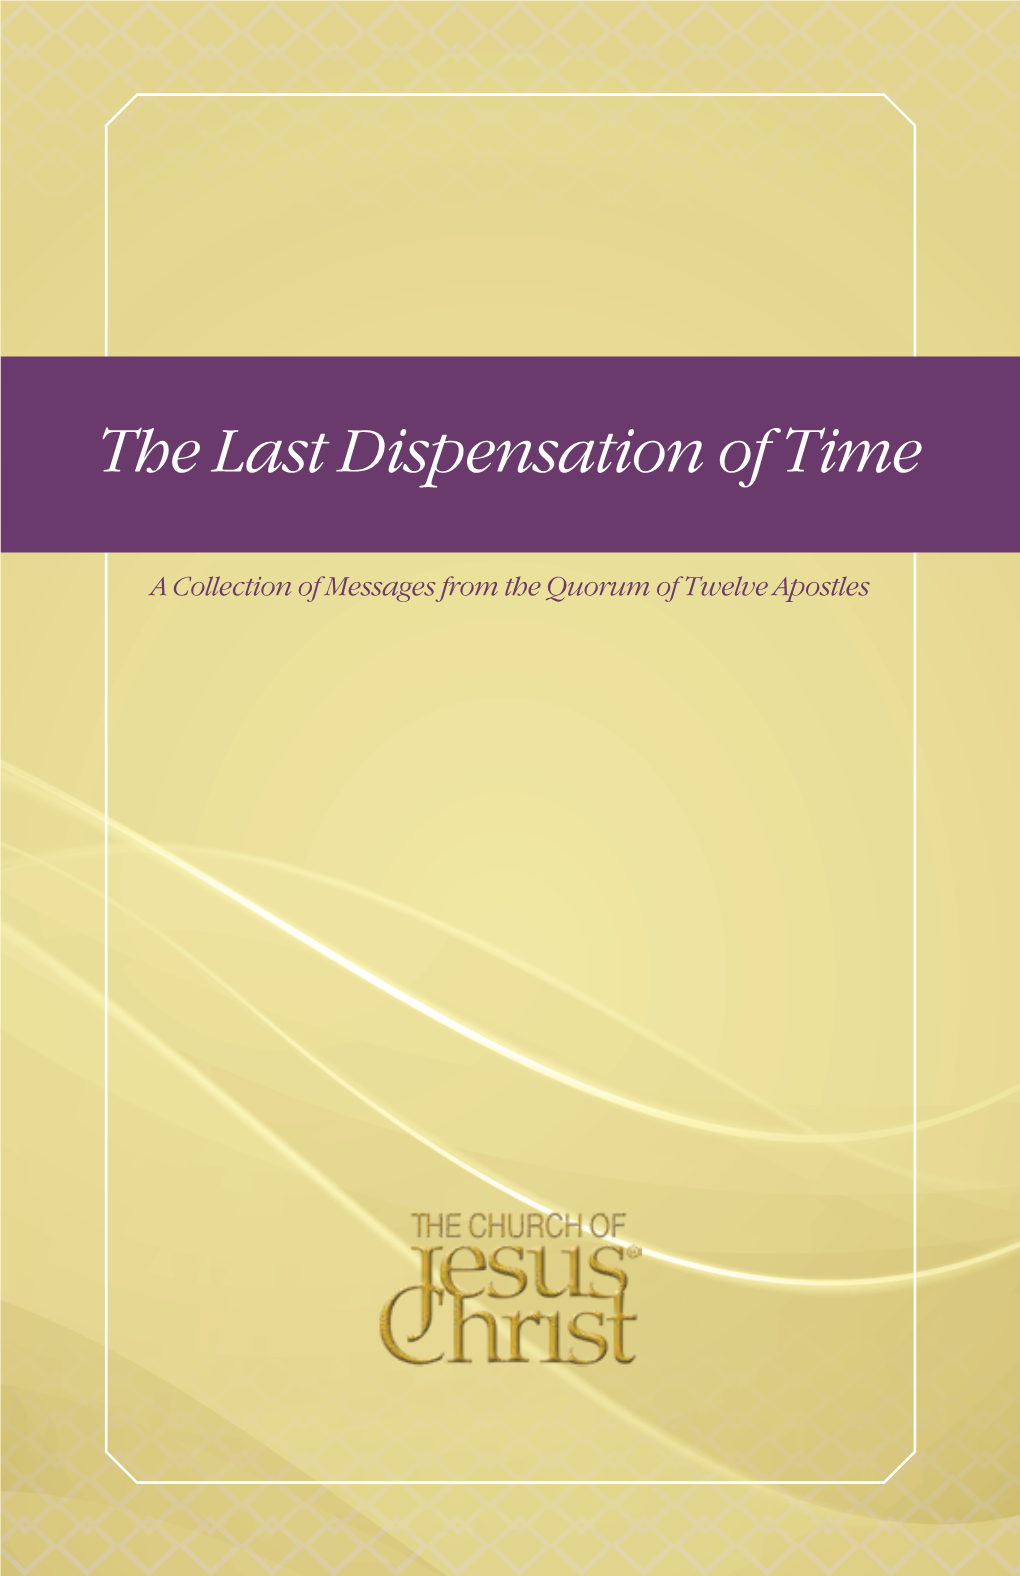 The Last Dispensation of Time